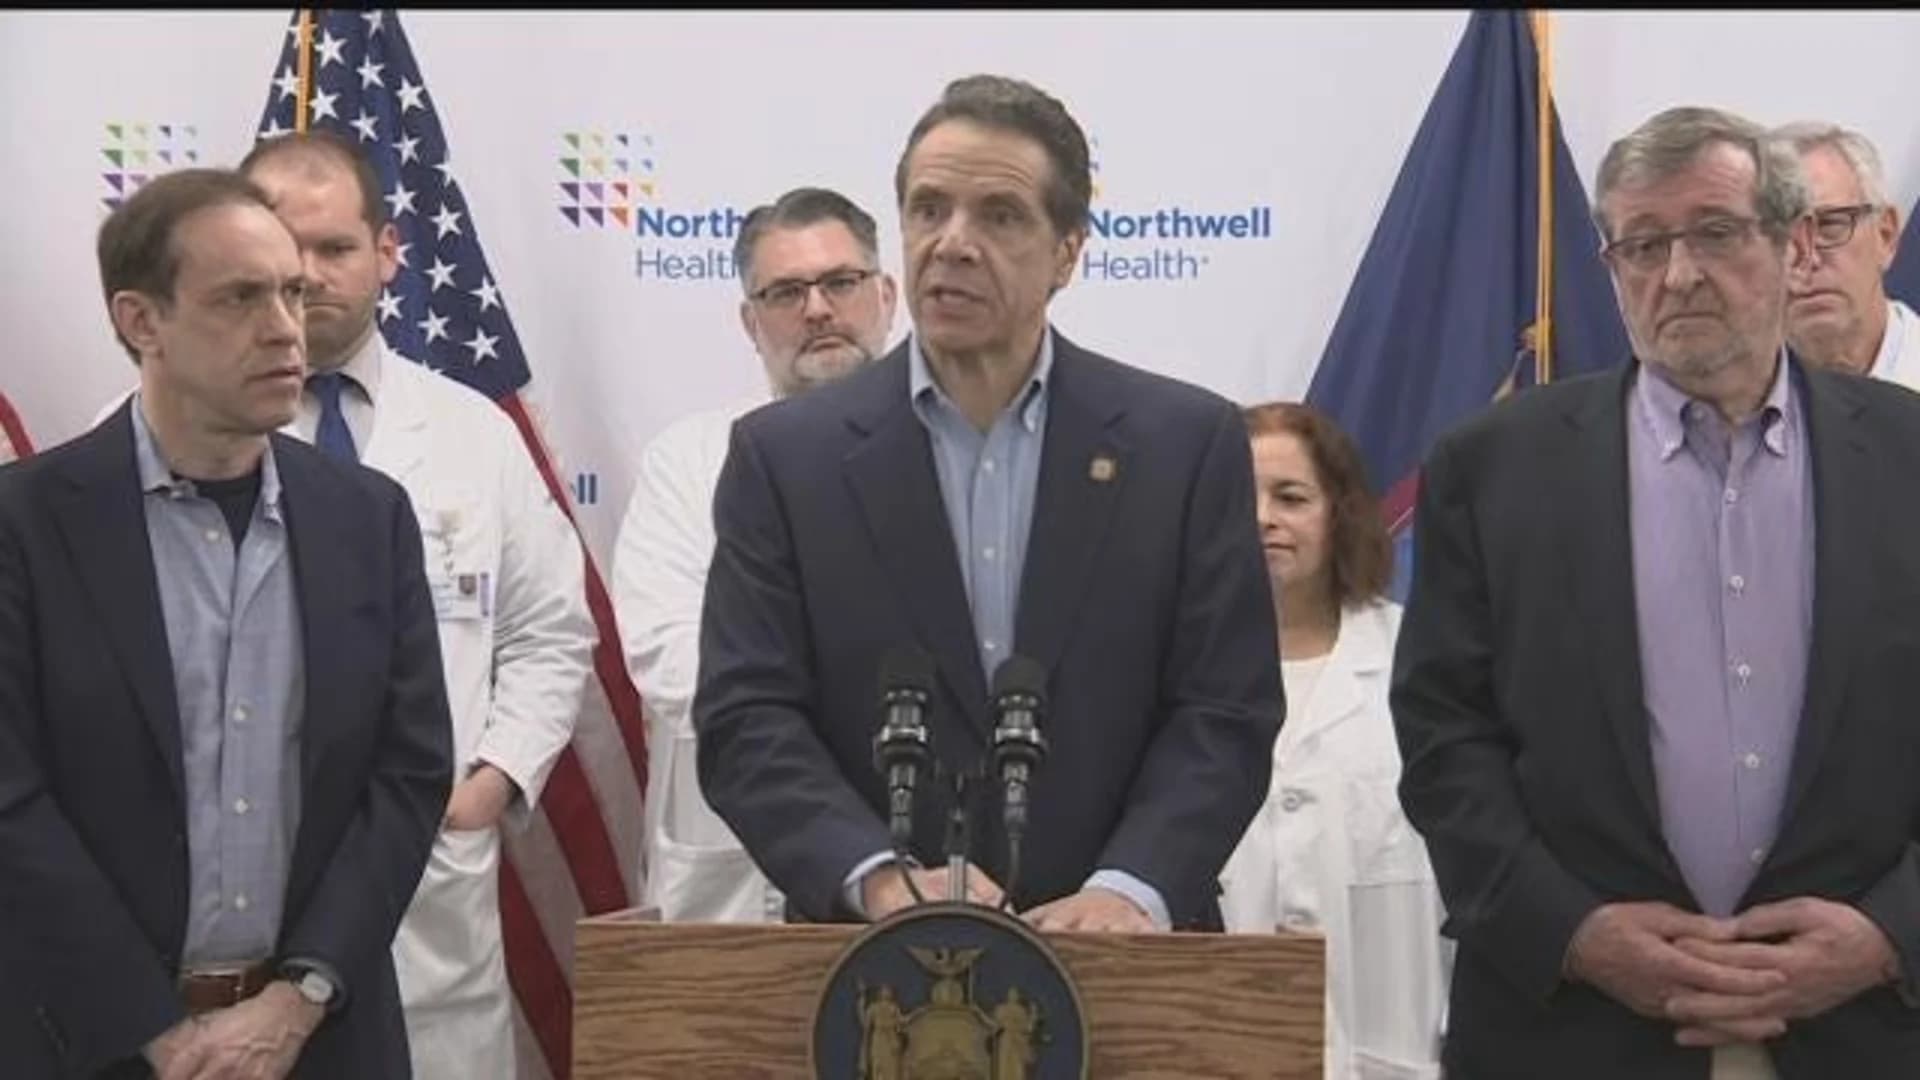 Cuomo urges NYers to avoid densely packed gatherings as coronavirus cases in state climb to at least 105